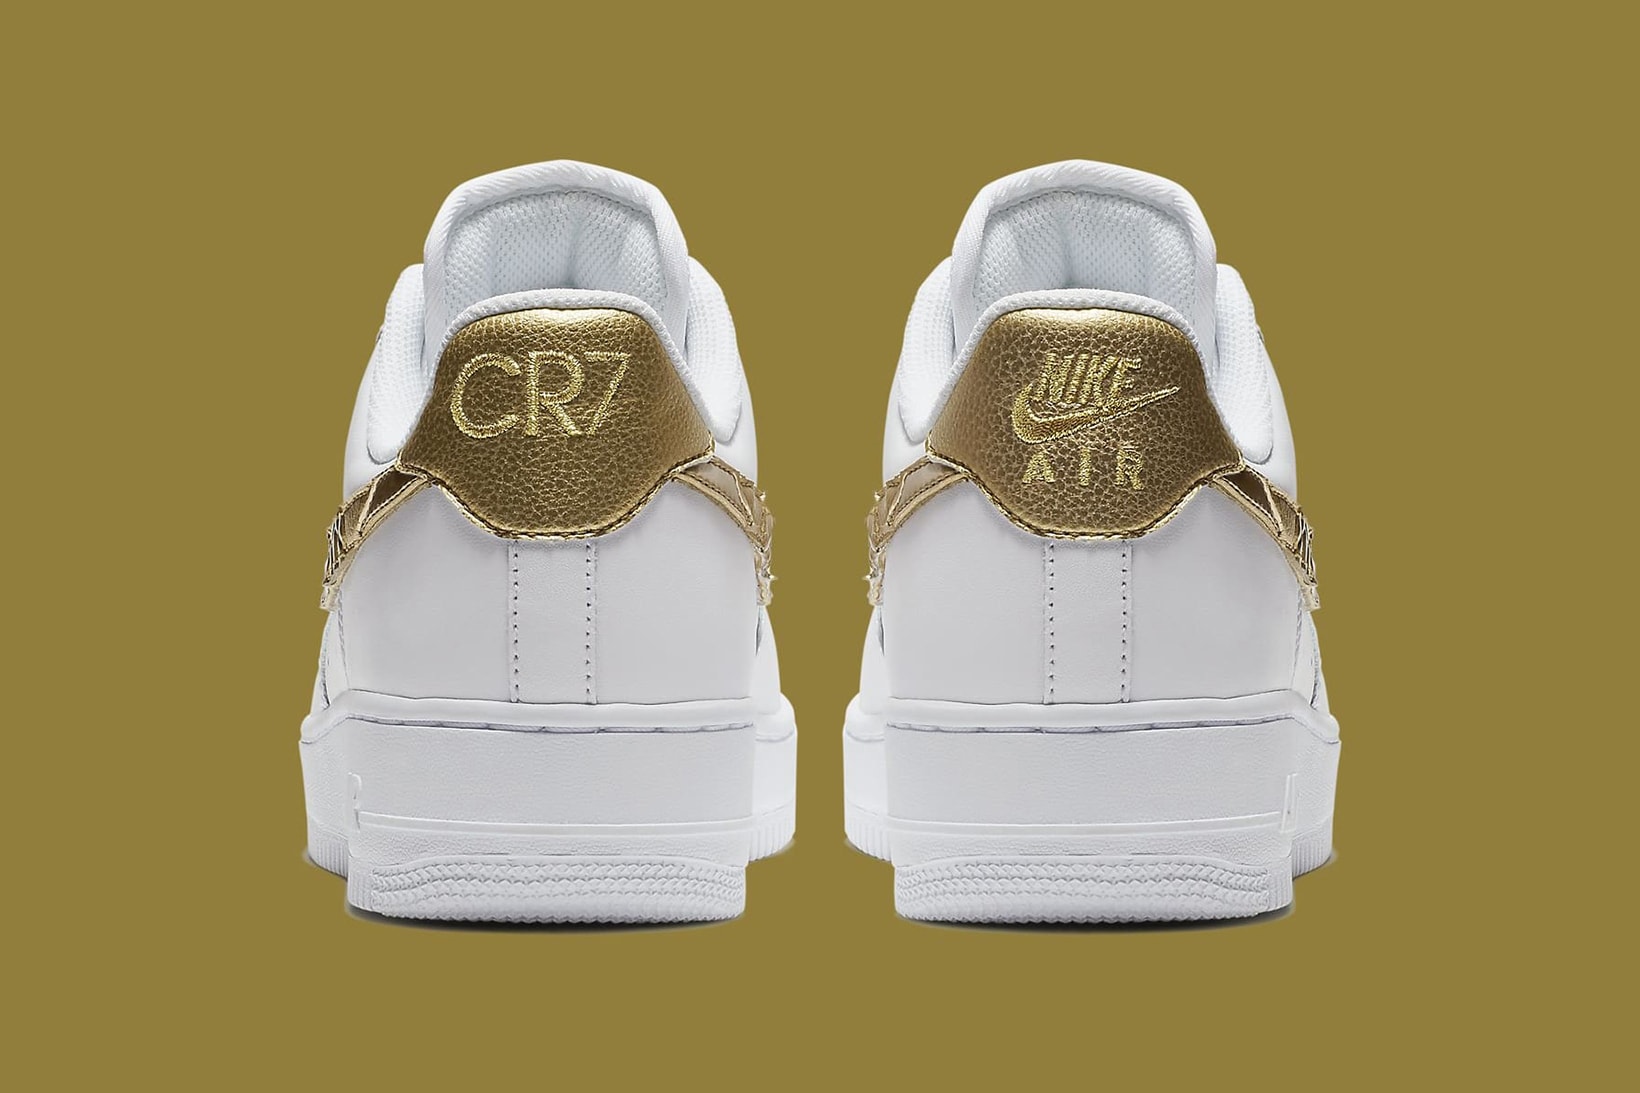 Nike Air Force 1 CR7 Cristiano Ronaldo White Gold 2017 December 7 Release Date Info Sneakers Shoes Footwear